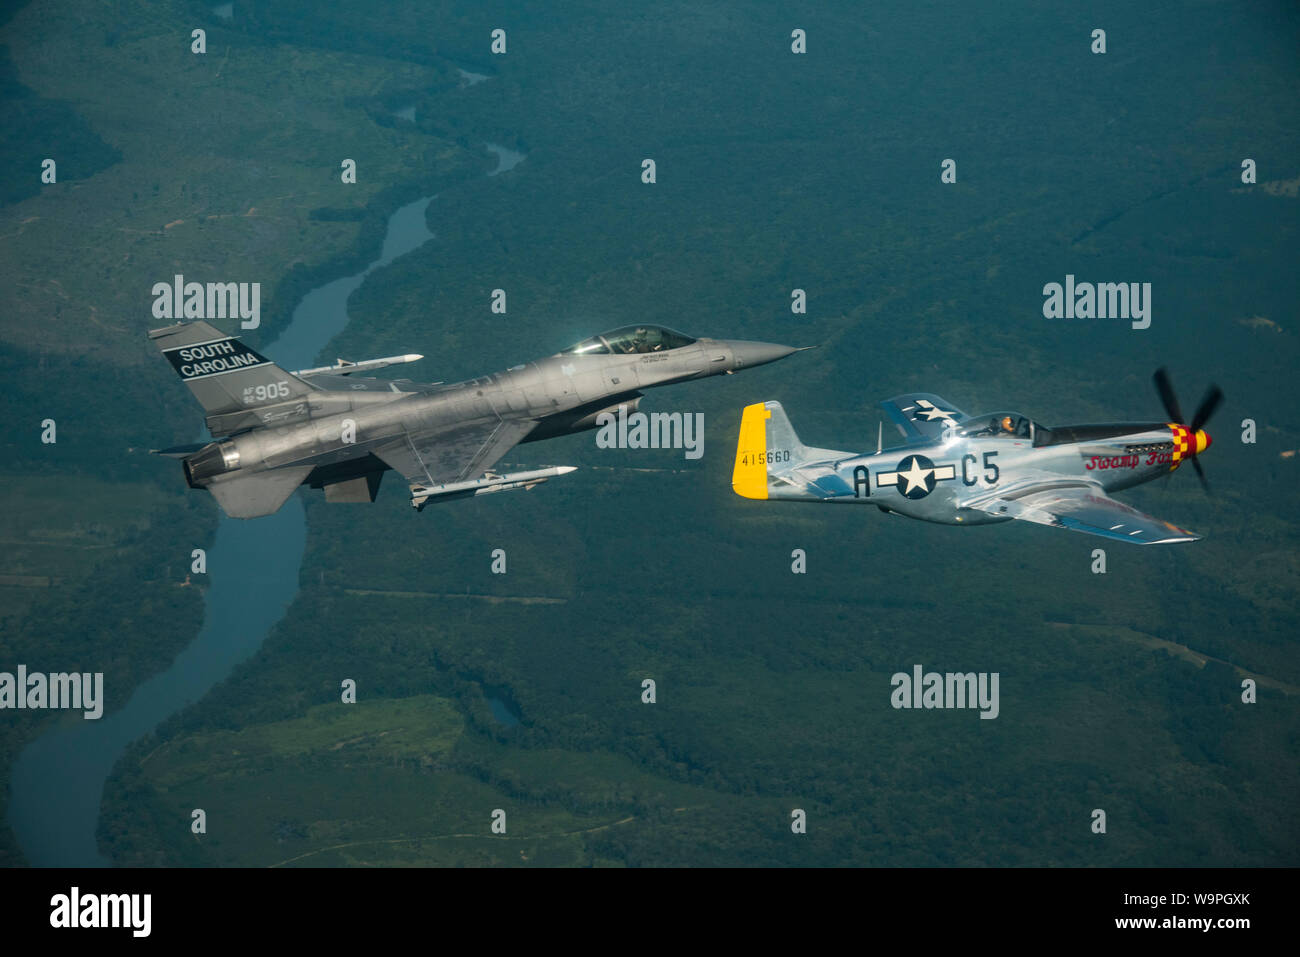 A South Carolina Air National Guard F-16 Fighting Falcon fighter jet, assigned to the 169th Fighter Wing, McEntire Joint National Guard Base, S.C. and a World War II era P-51 Mustang team up to celebrate their aviation history by flying together near South Carolina landmarks, Fort Sumter and USS Yorktown (CV 5), August 10, 2019. The 169 FW is proud of its 70-plus years as a single-seat fighter unit and its namesake, South Carolina American Revolutionary War hero General Francis “the Swamp Fox” Marion. The P-51 Mustang bears the name “Swamp Fox.” The P-51, owned and operated by R.T. Dickson, wa Stock Photo